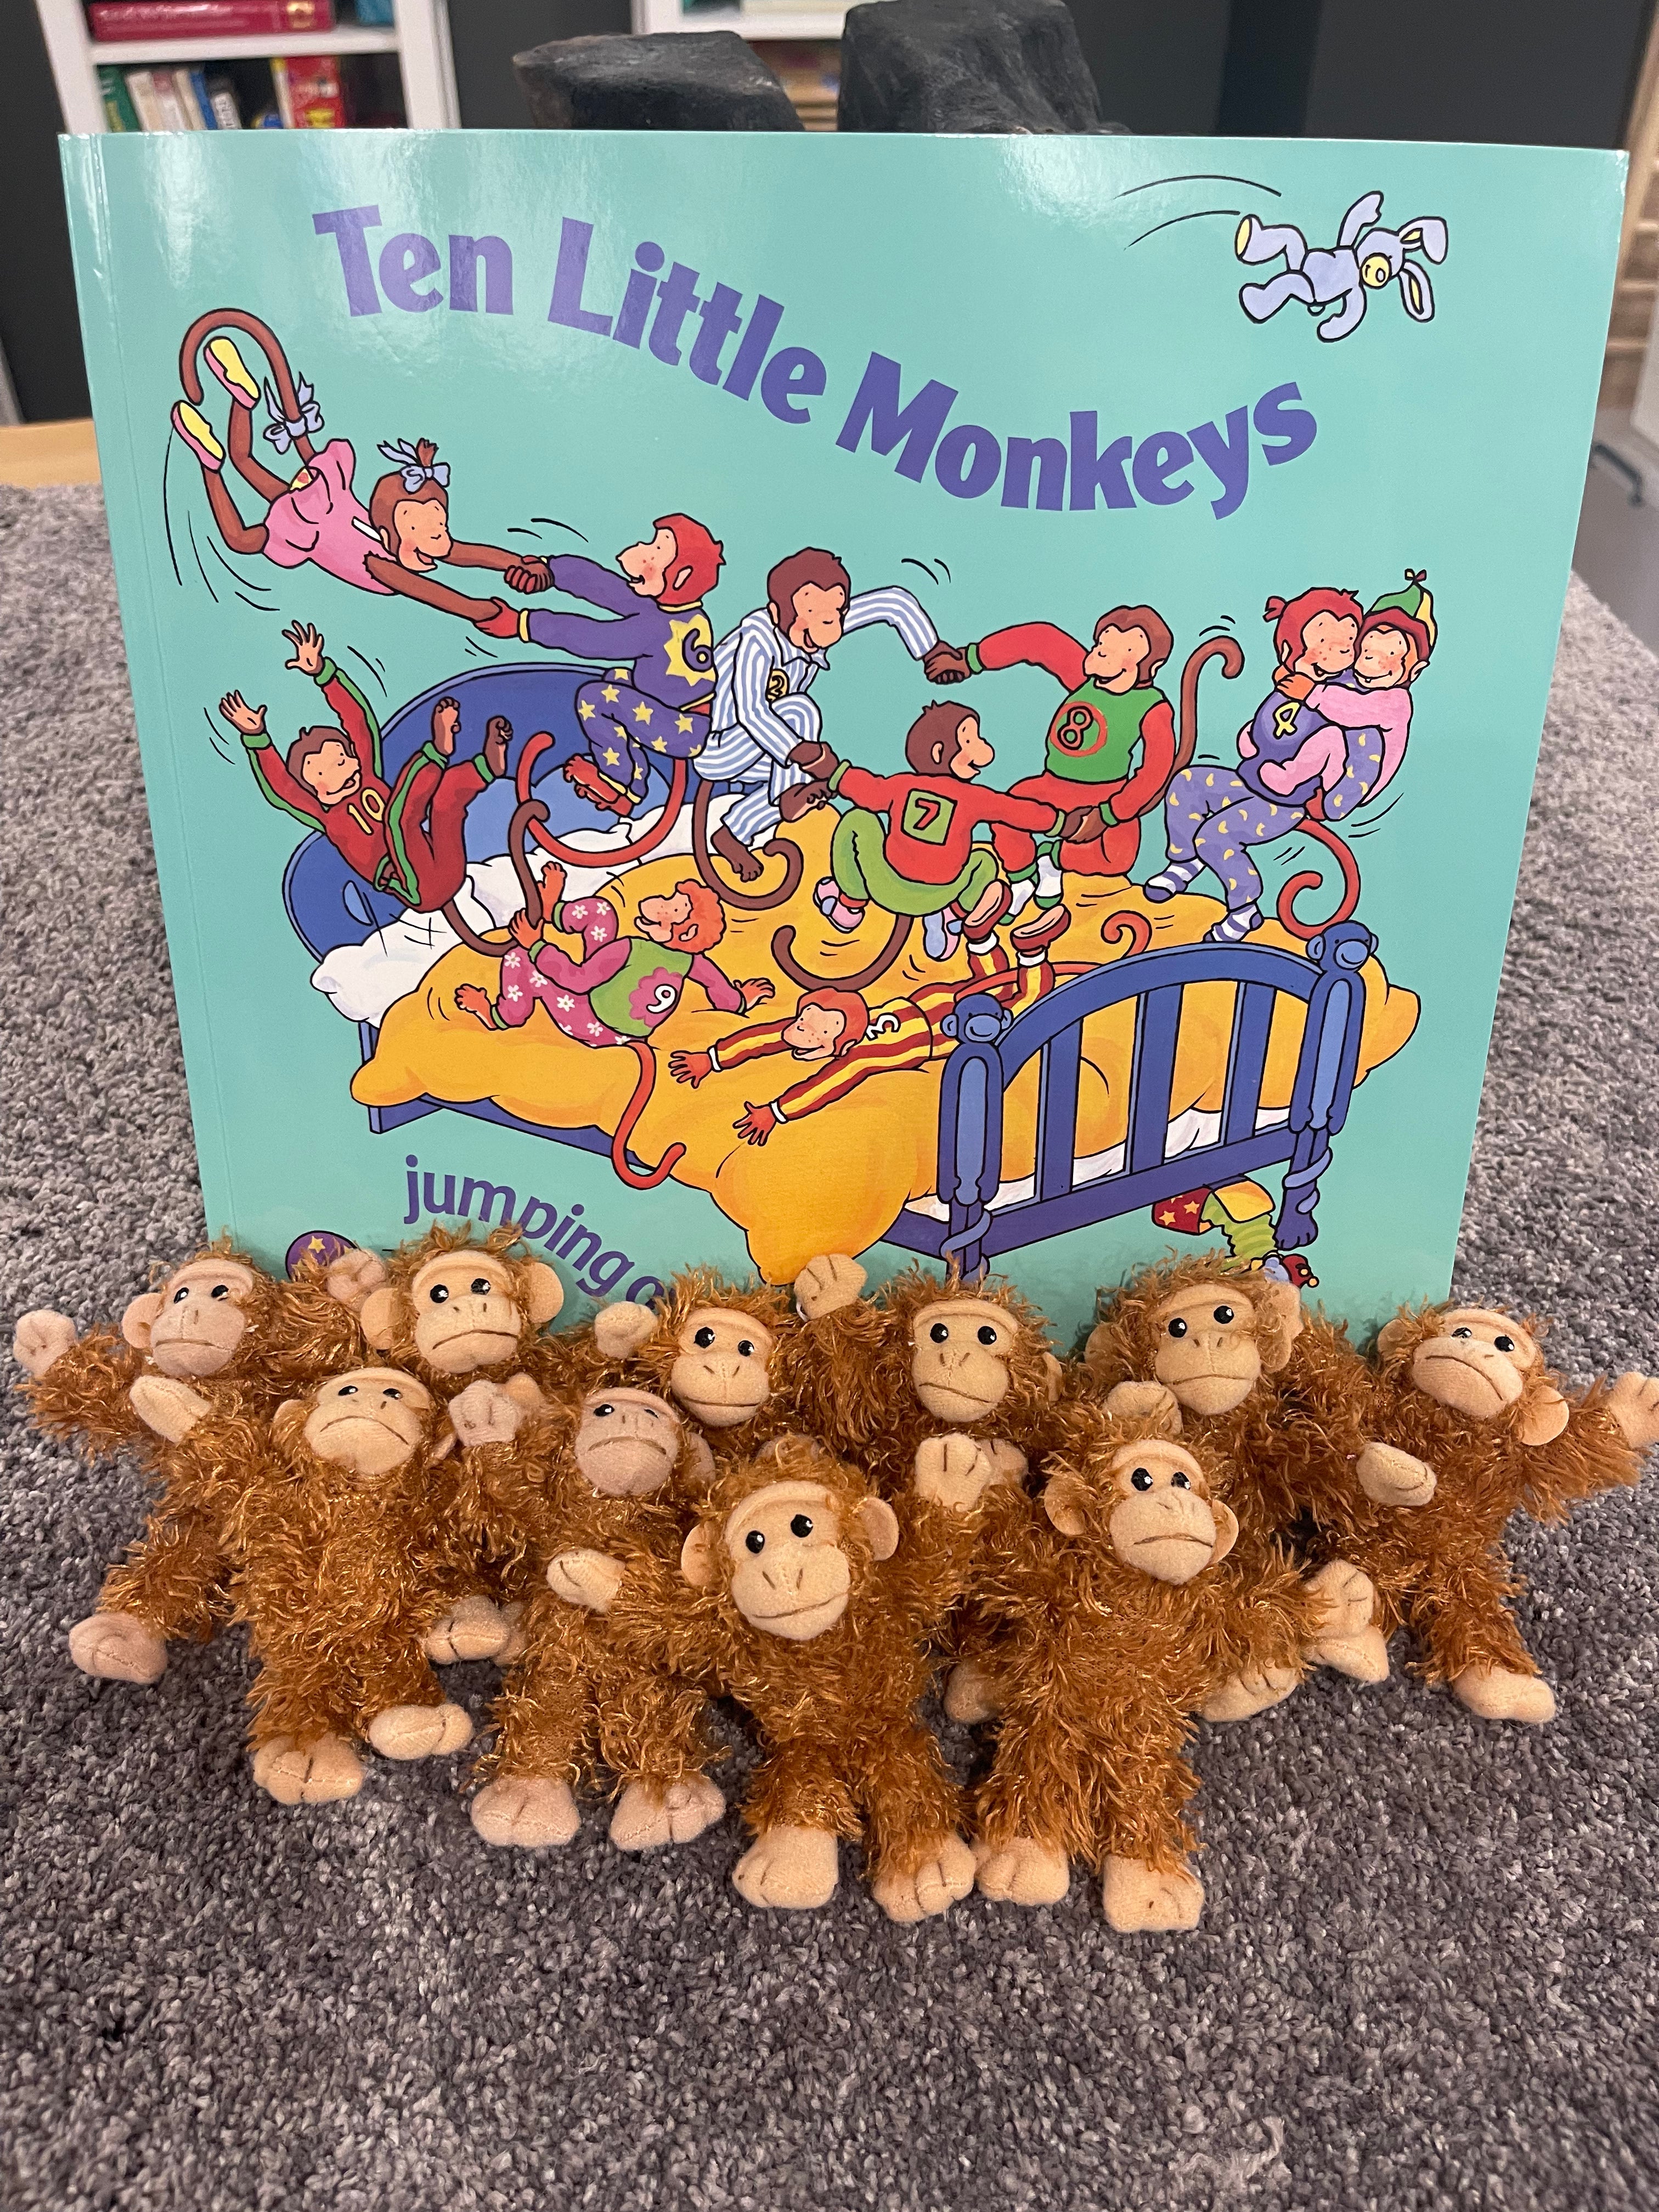 10 little monkeys story book and Auslan DVD with 10 finger puppets